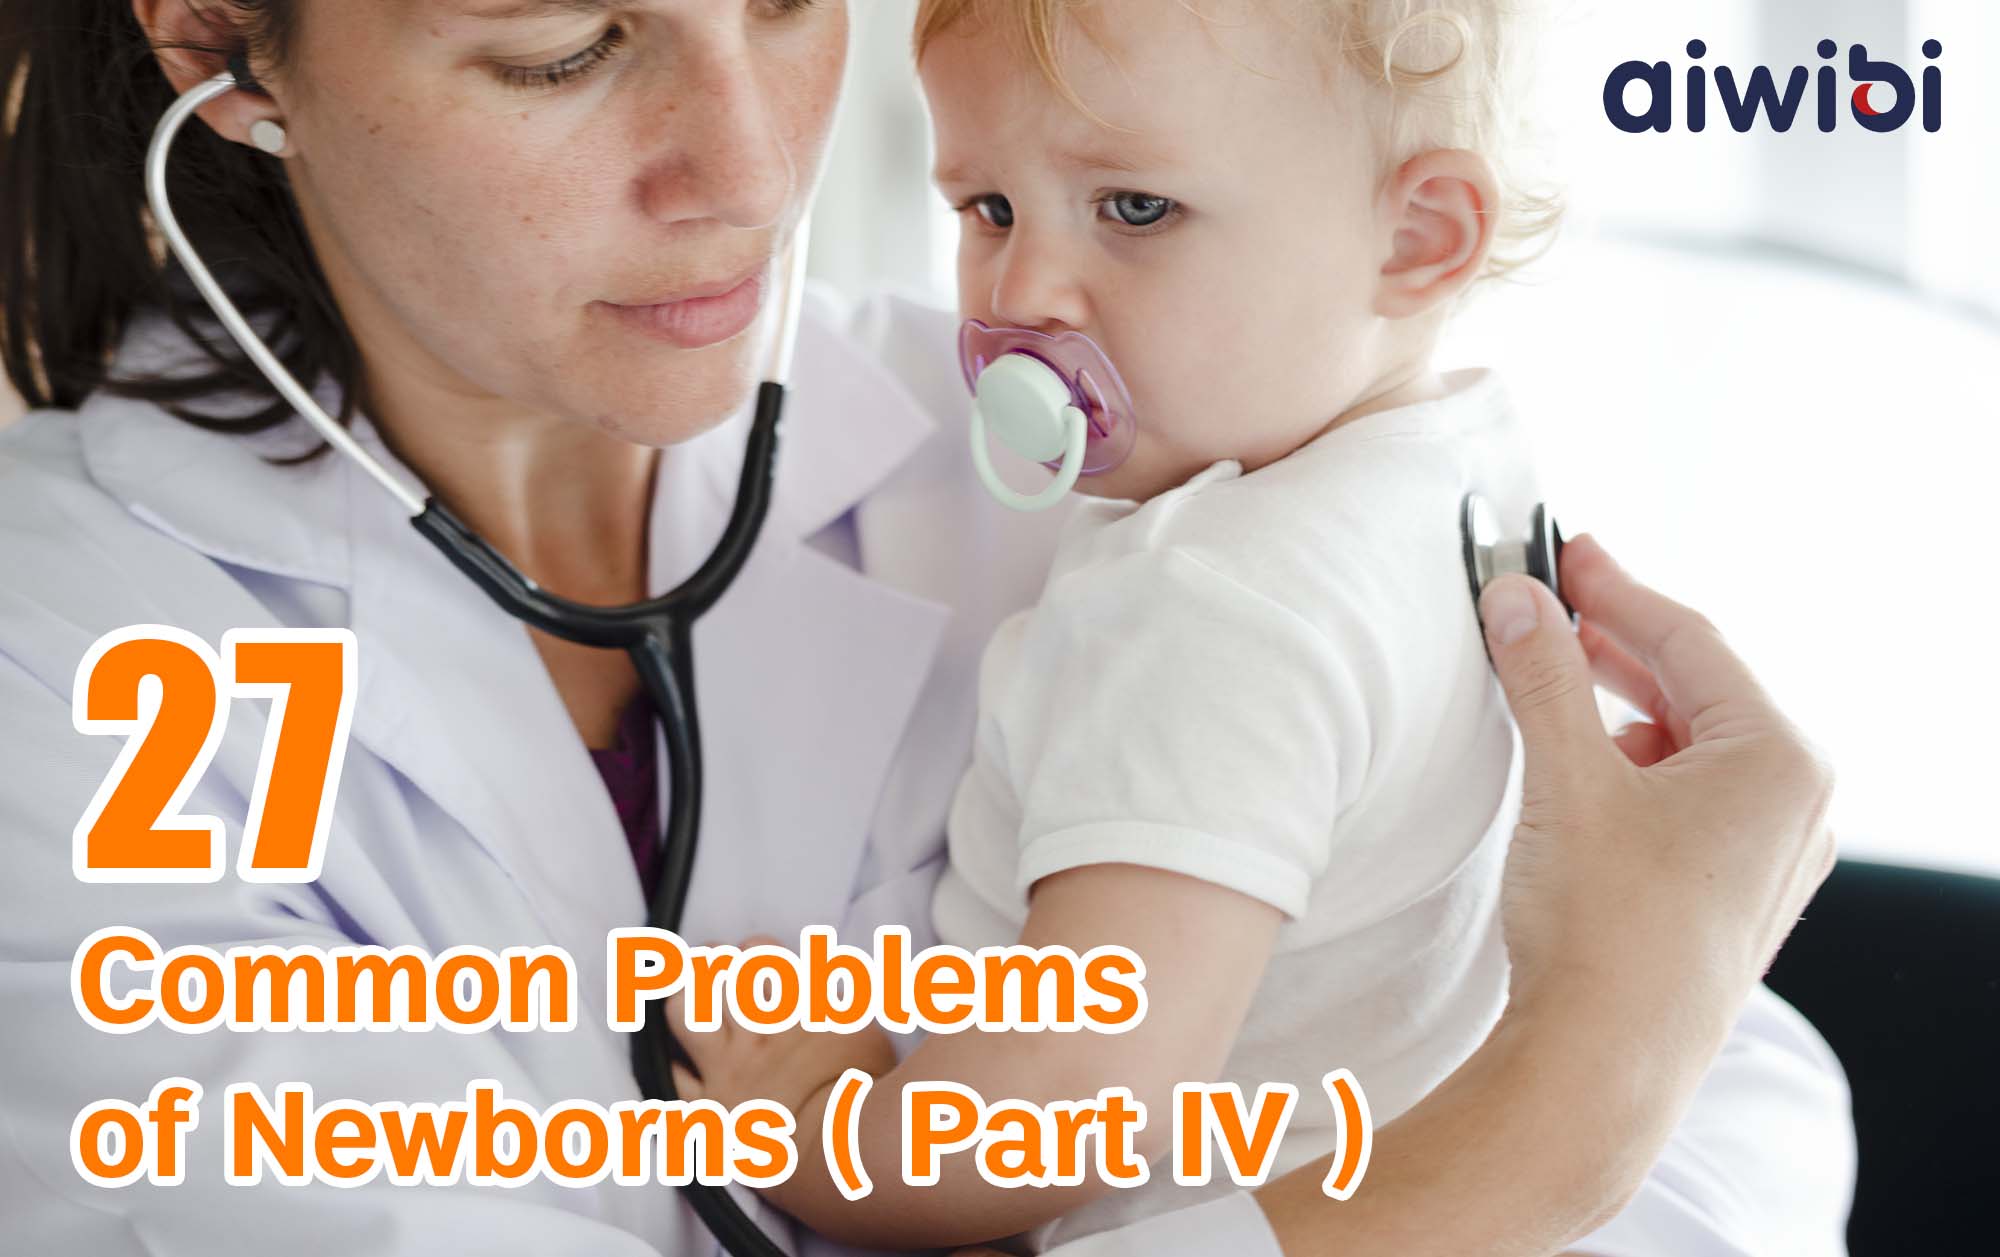 Parents Must Know How to Deal With the 27 Common Problems of Newborns（Part IV）